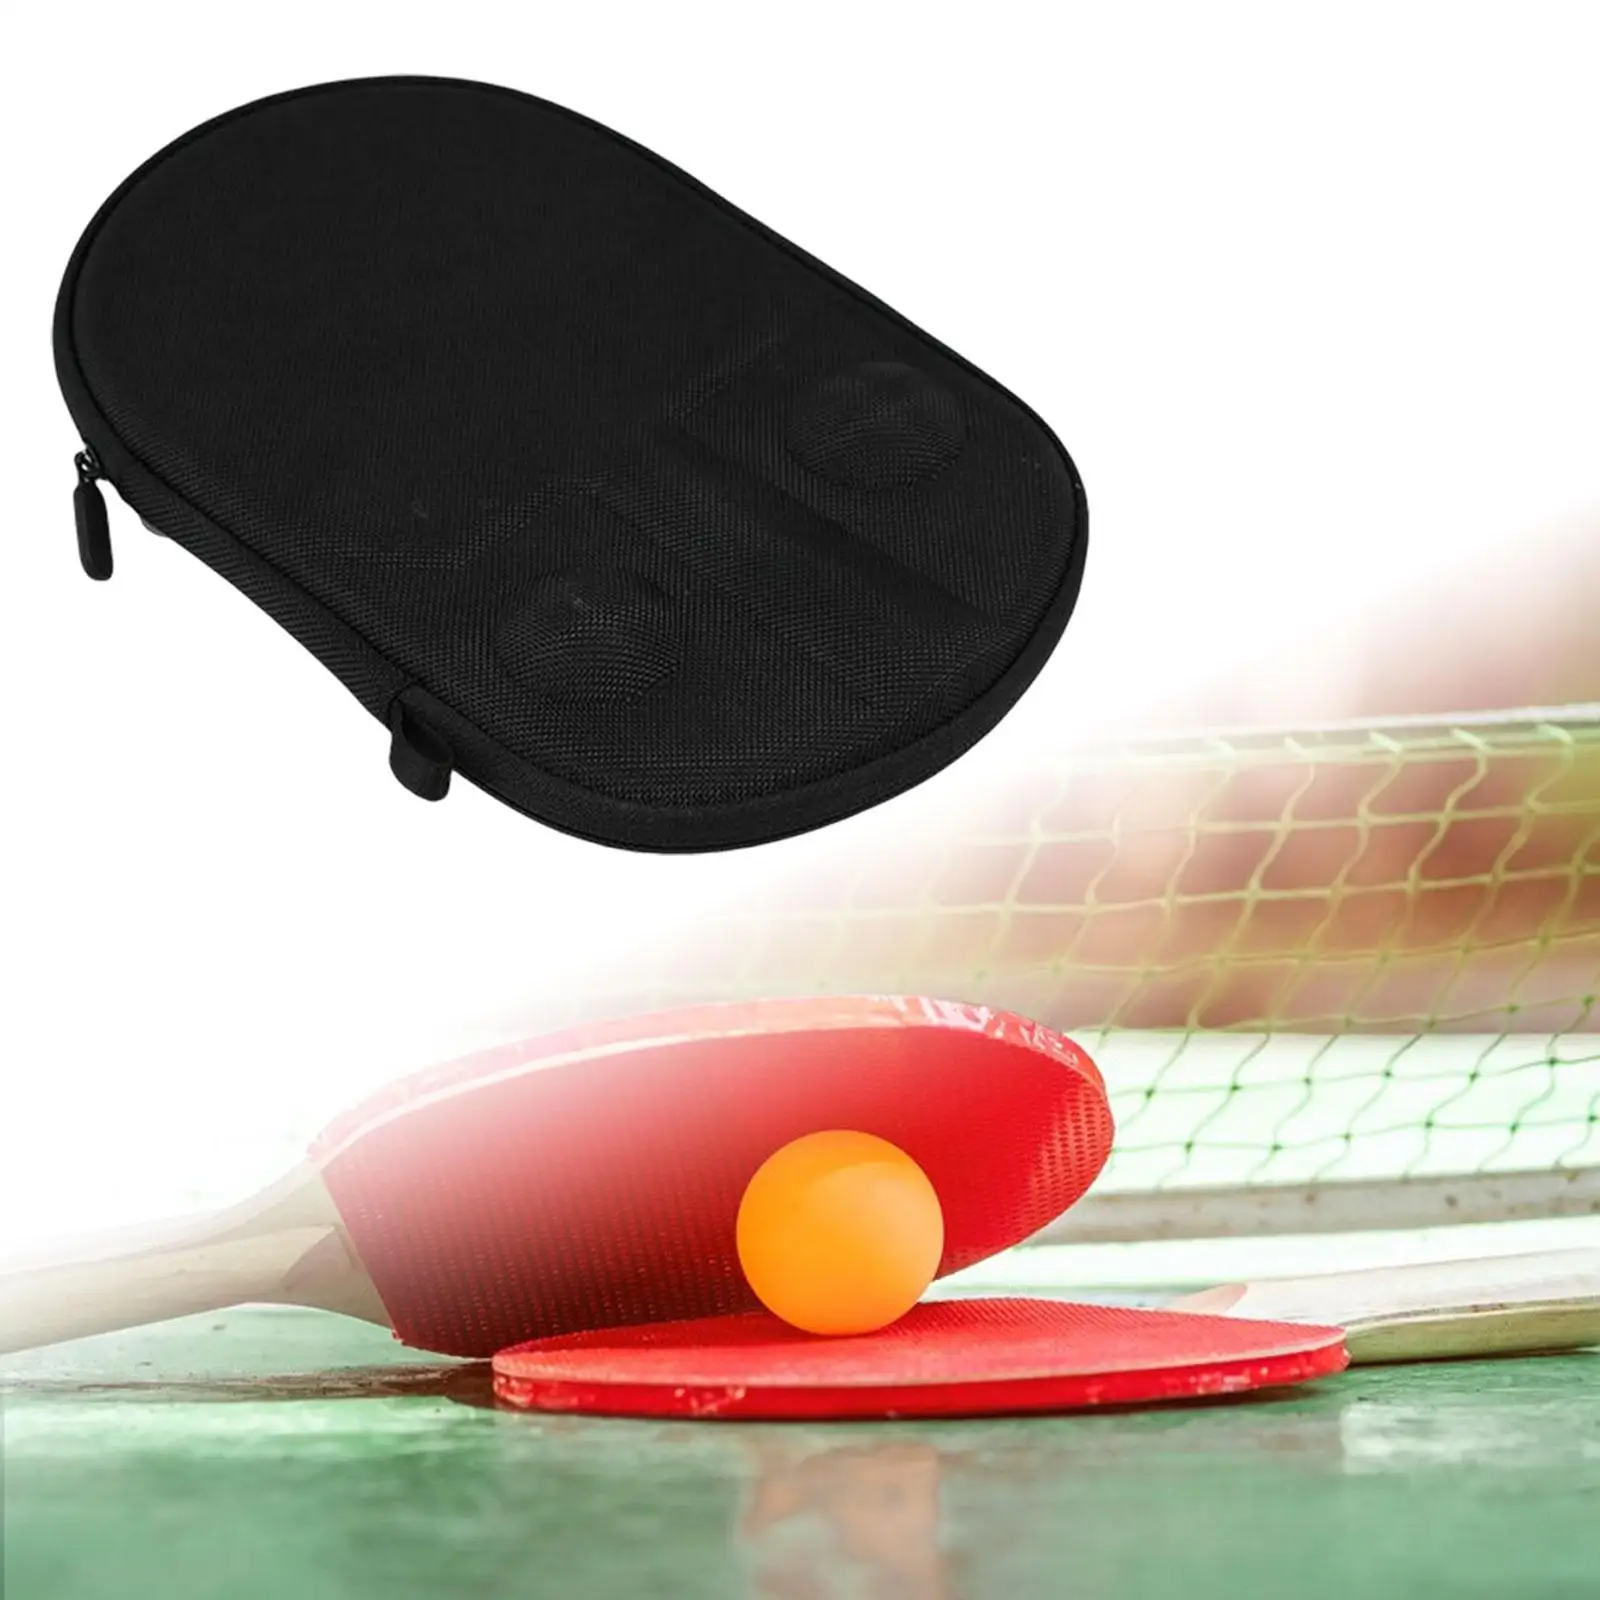 Multifunction Table Tennis Racket Bag Waterproof Durable Hold 1 Racket and two balls Table Tennis Protector Reusable for Outdoor